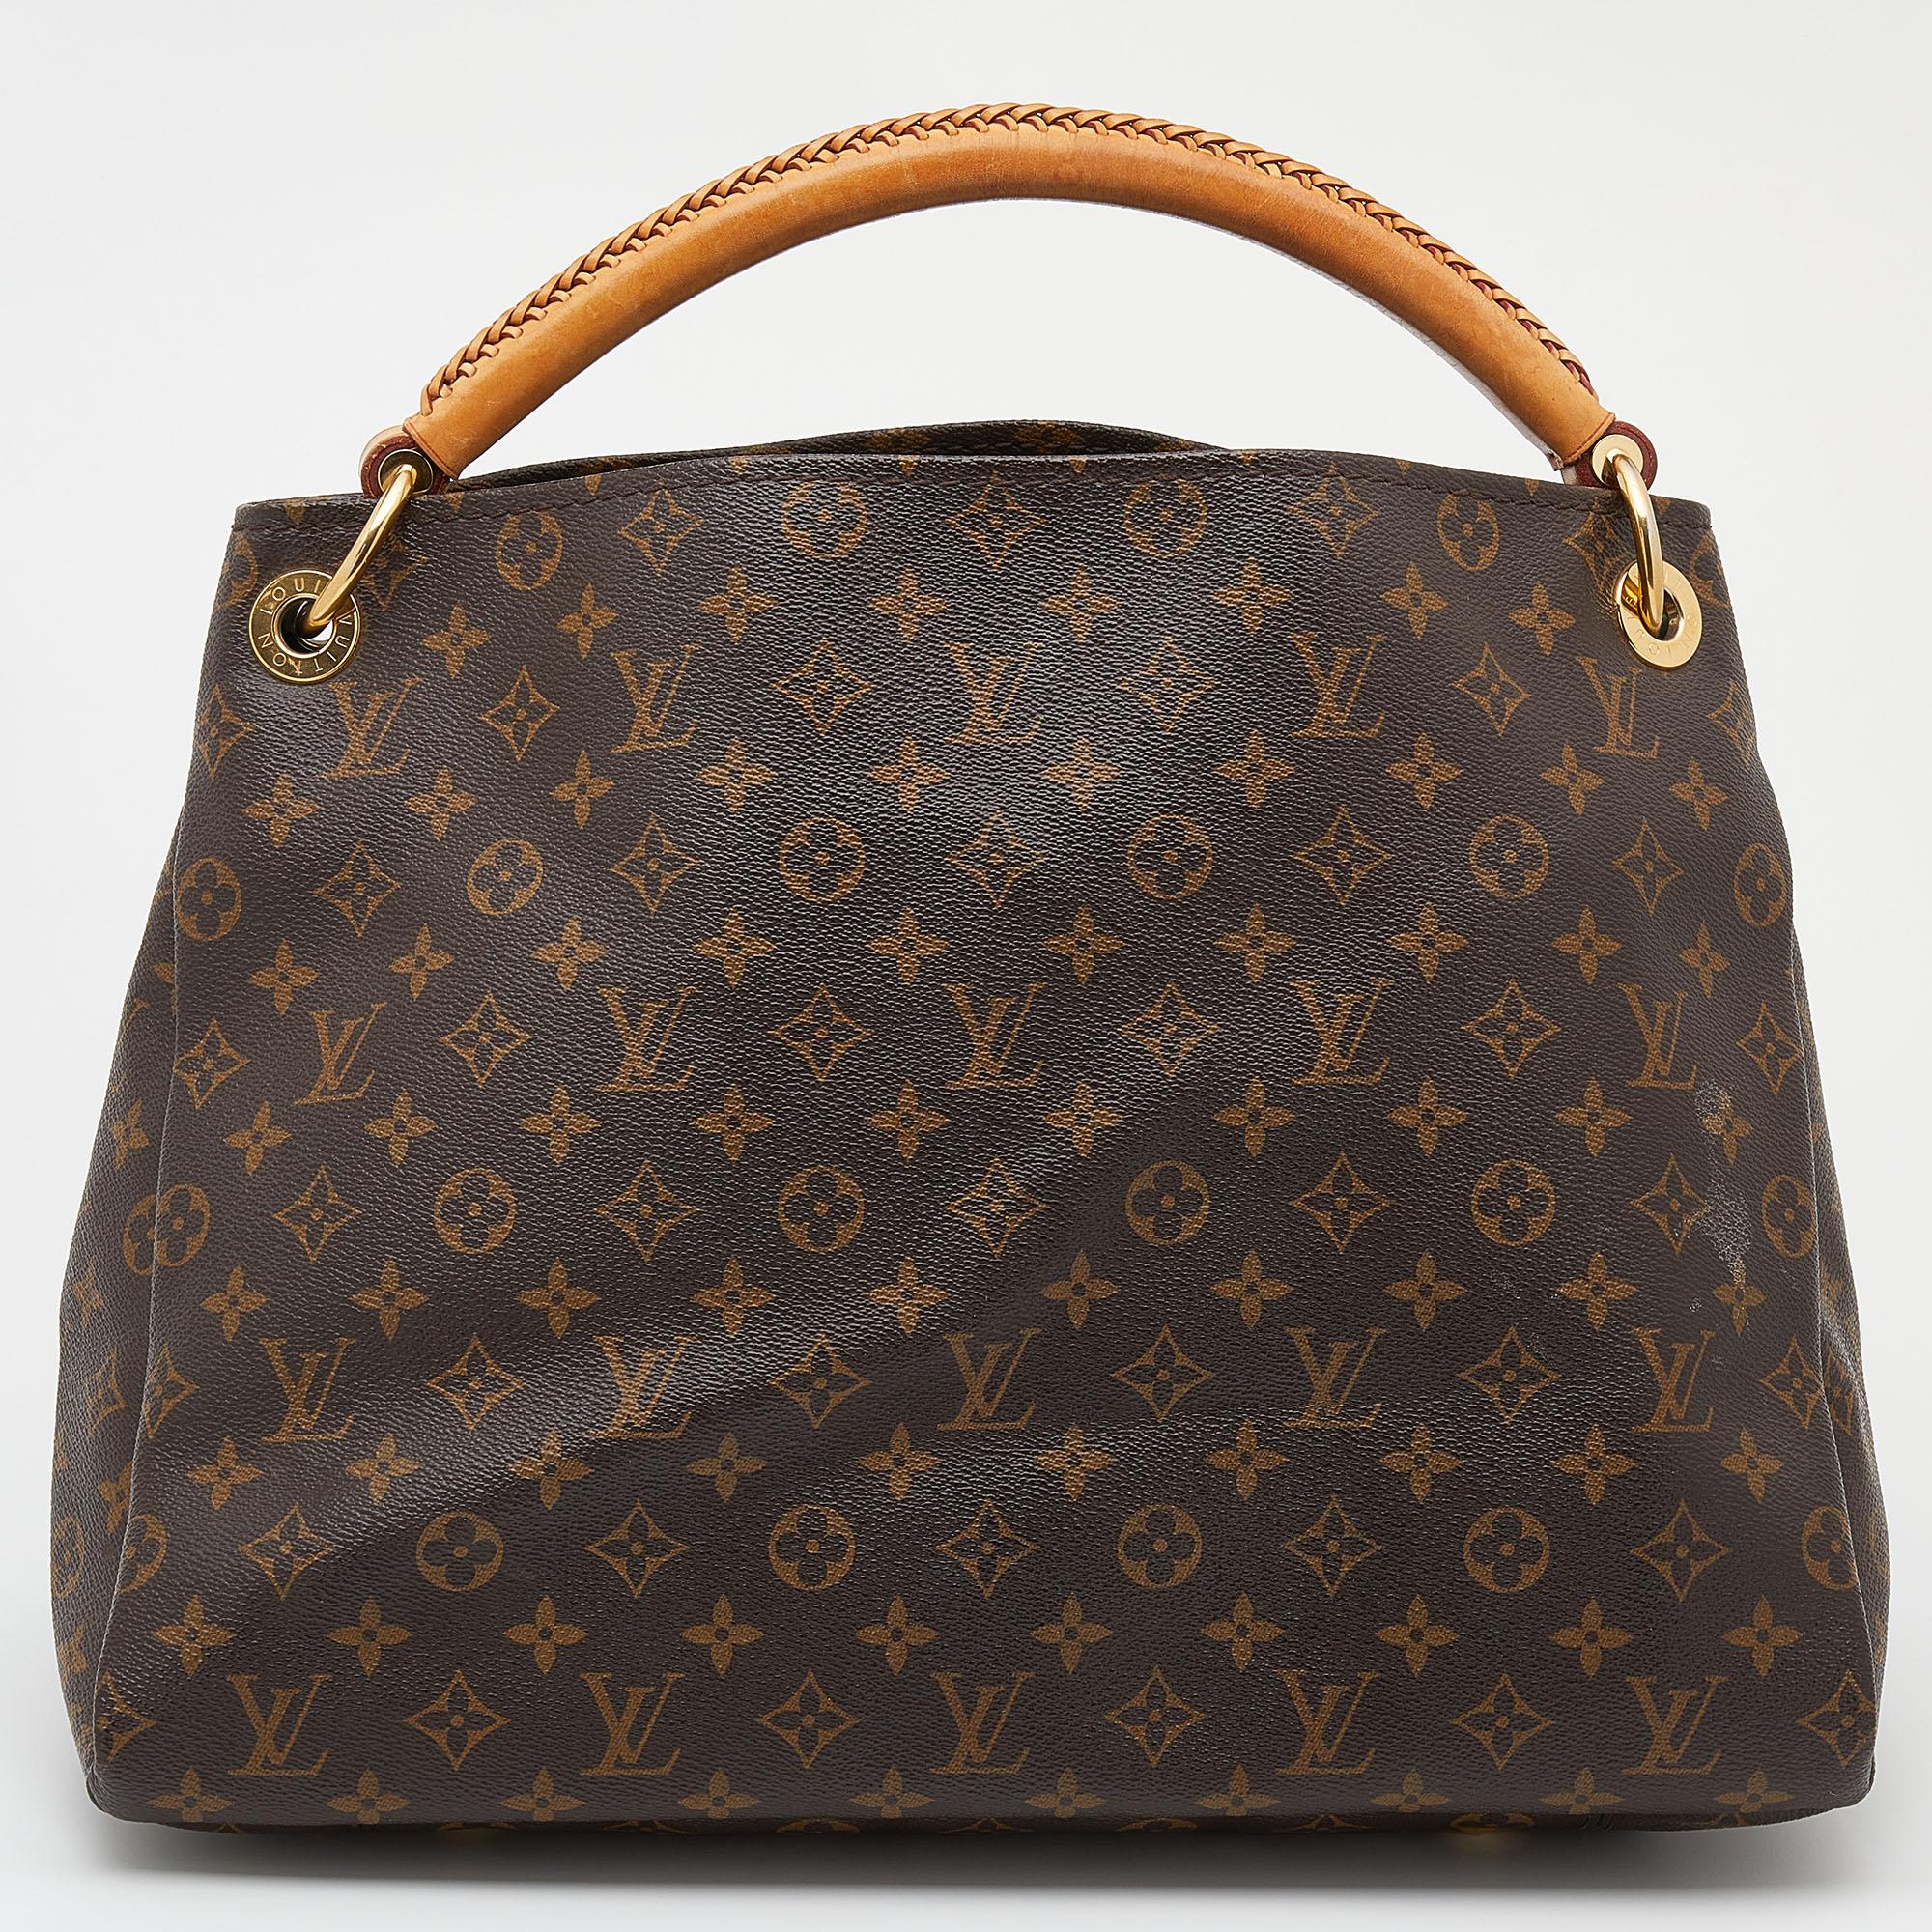 Flaunt this Louis Vuitton Artsy bag like a fashionista! Crafted from their signature monogram canvas and leather, this bag features an open top that reveals an Alcantara-lined interior, spacious enough to carry all your essentials. The bag is